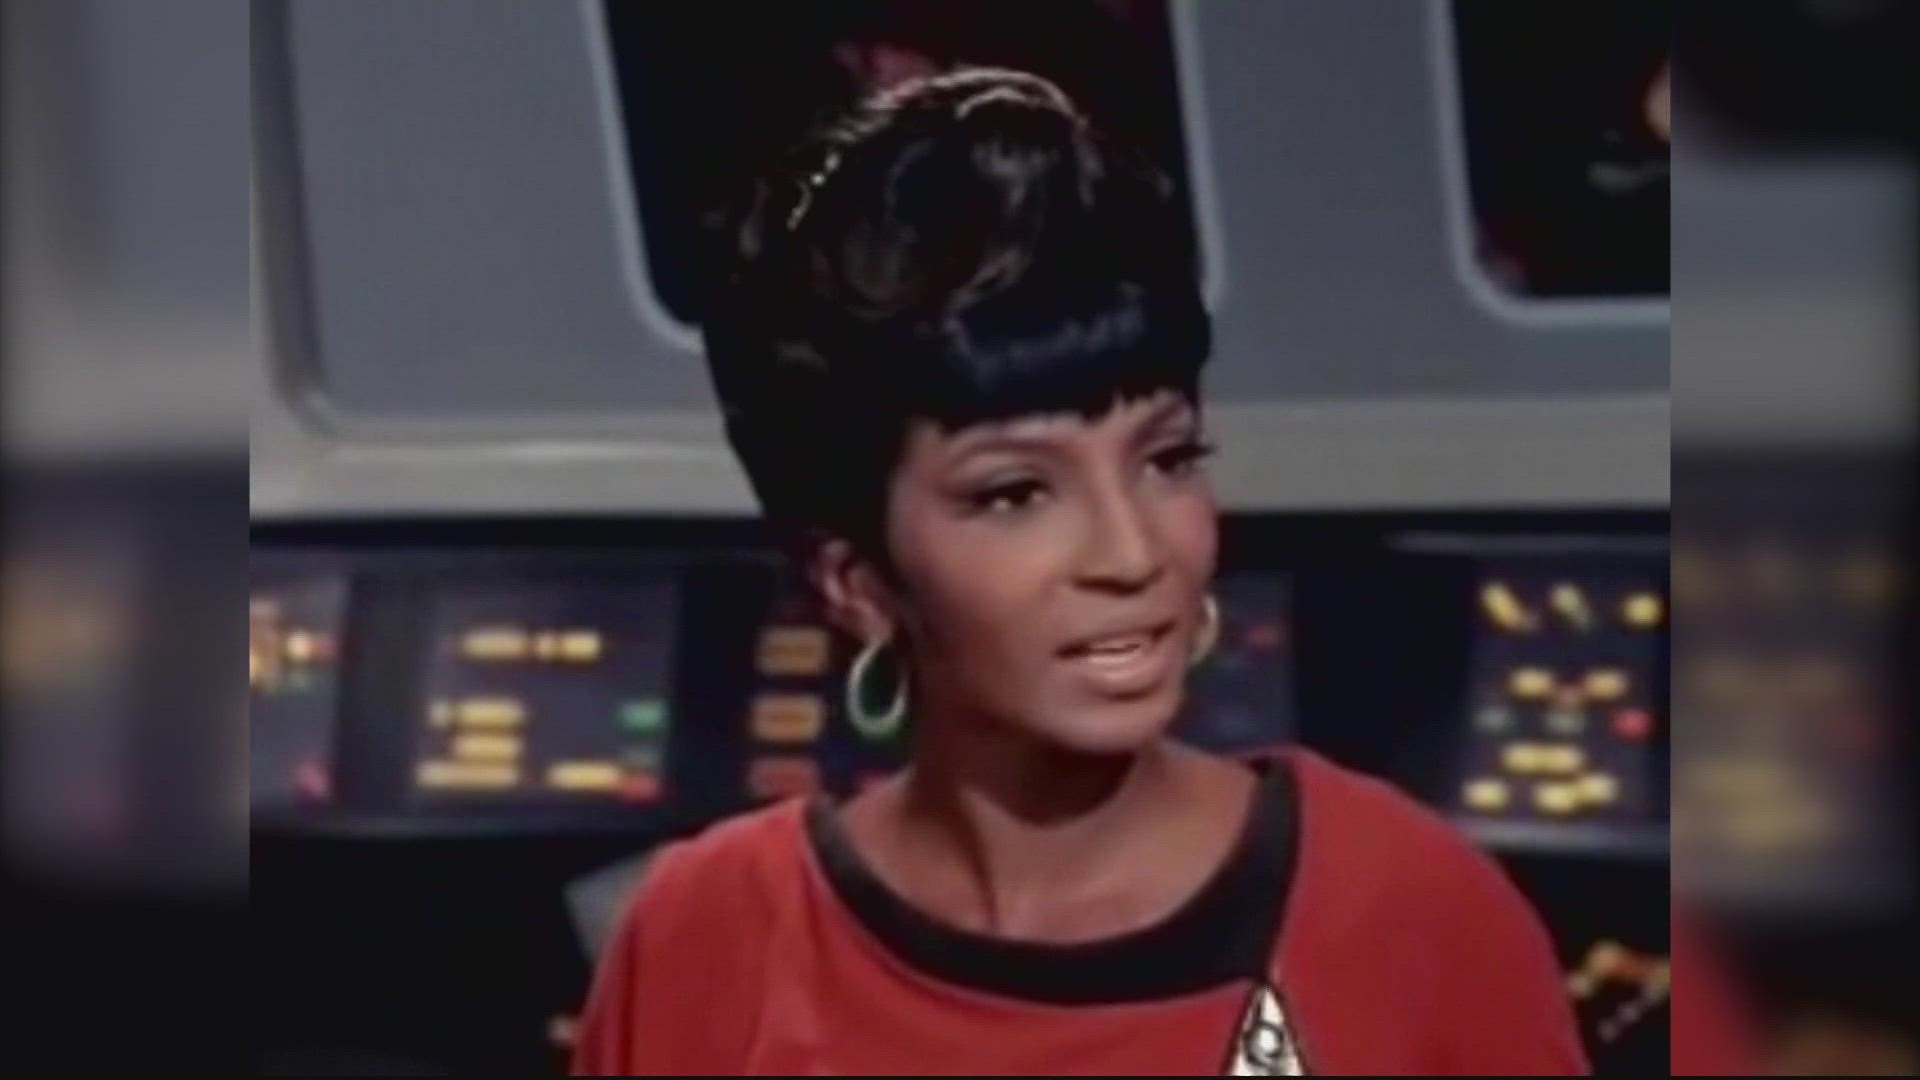 Nichelle Nichols, who broke barriers for Black women in Hollywood when she played Lt. Uhura on the original "Star Trek" televisions series, has died at the age of 89